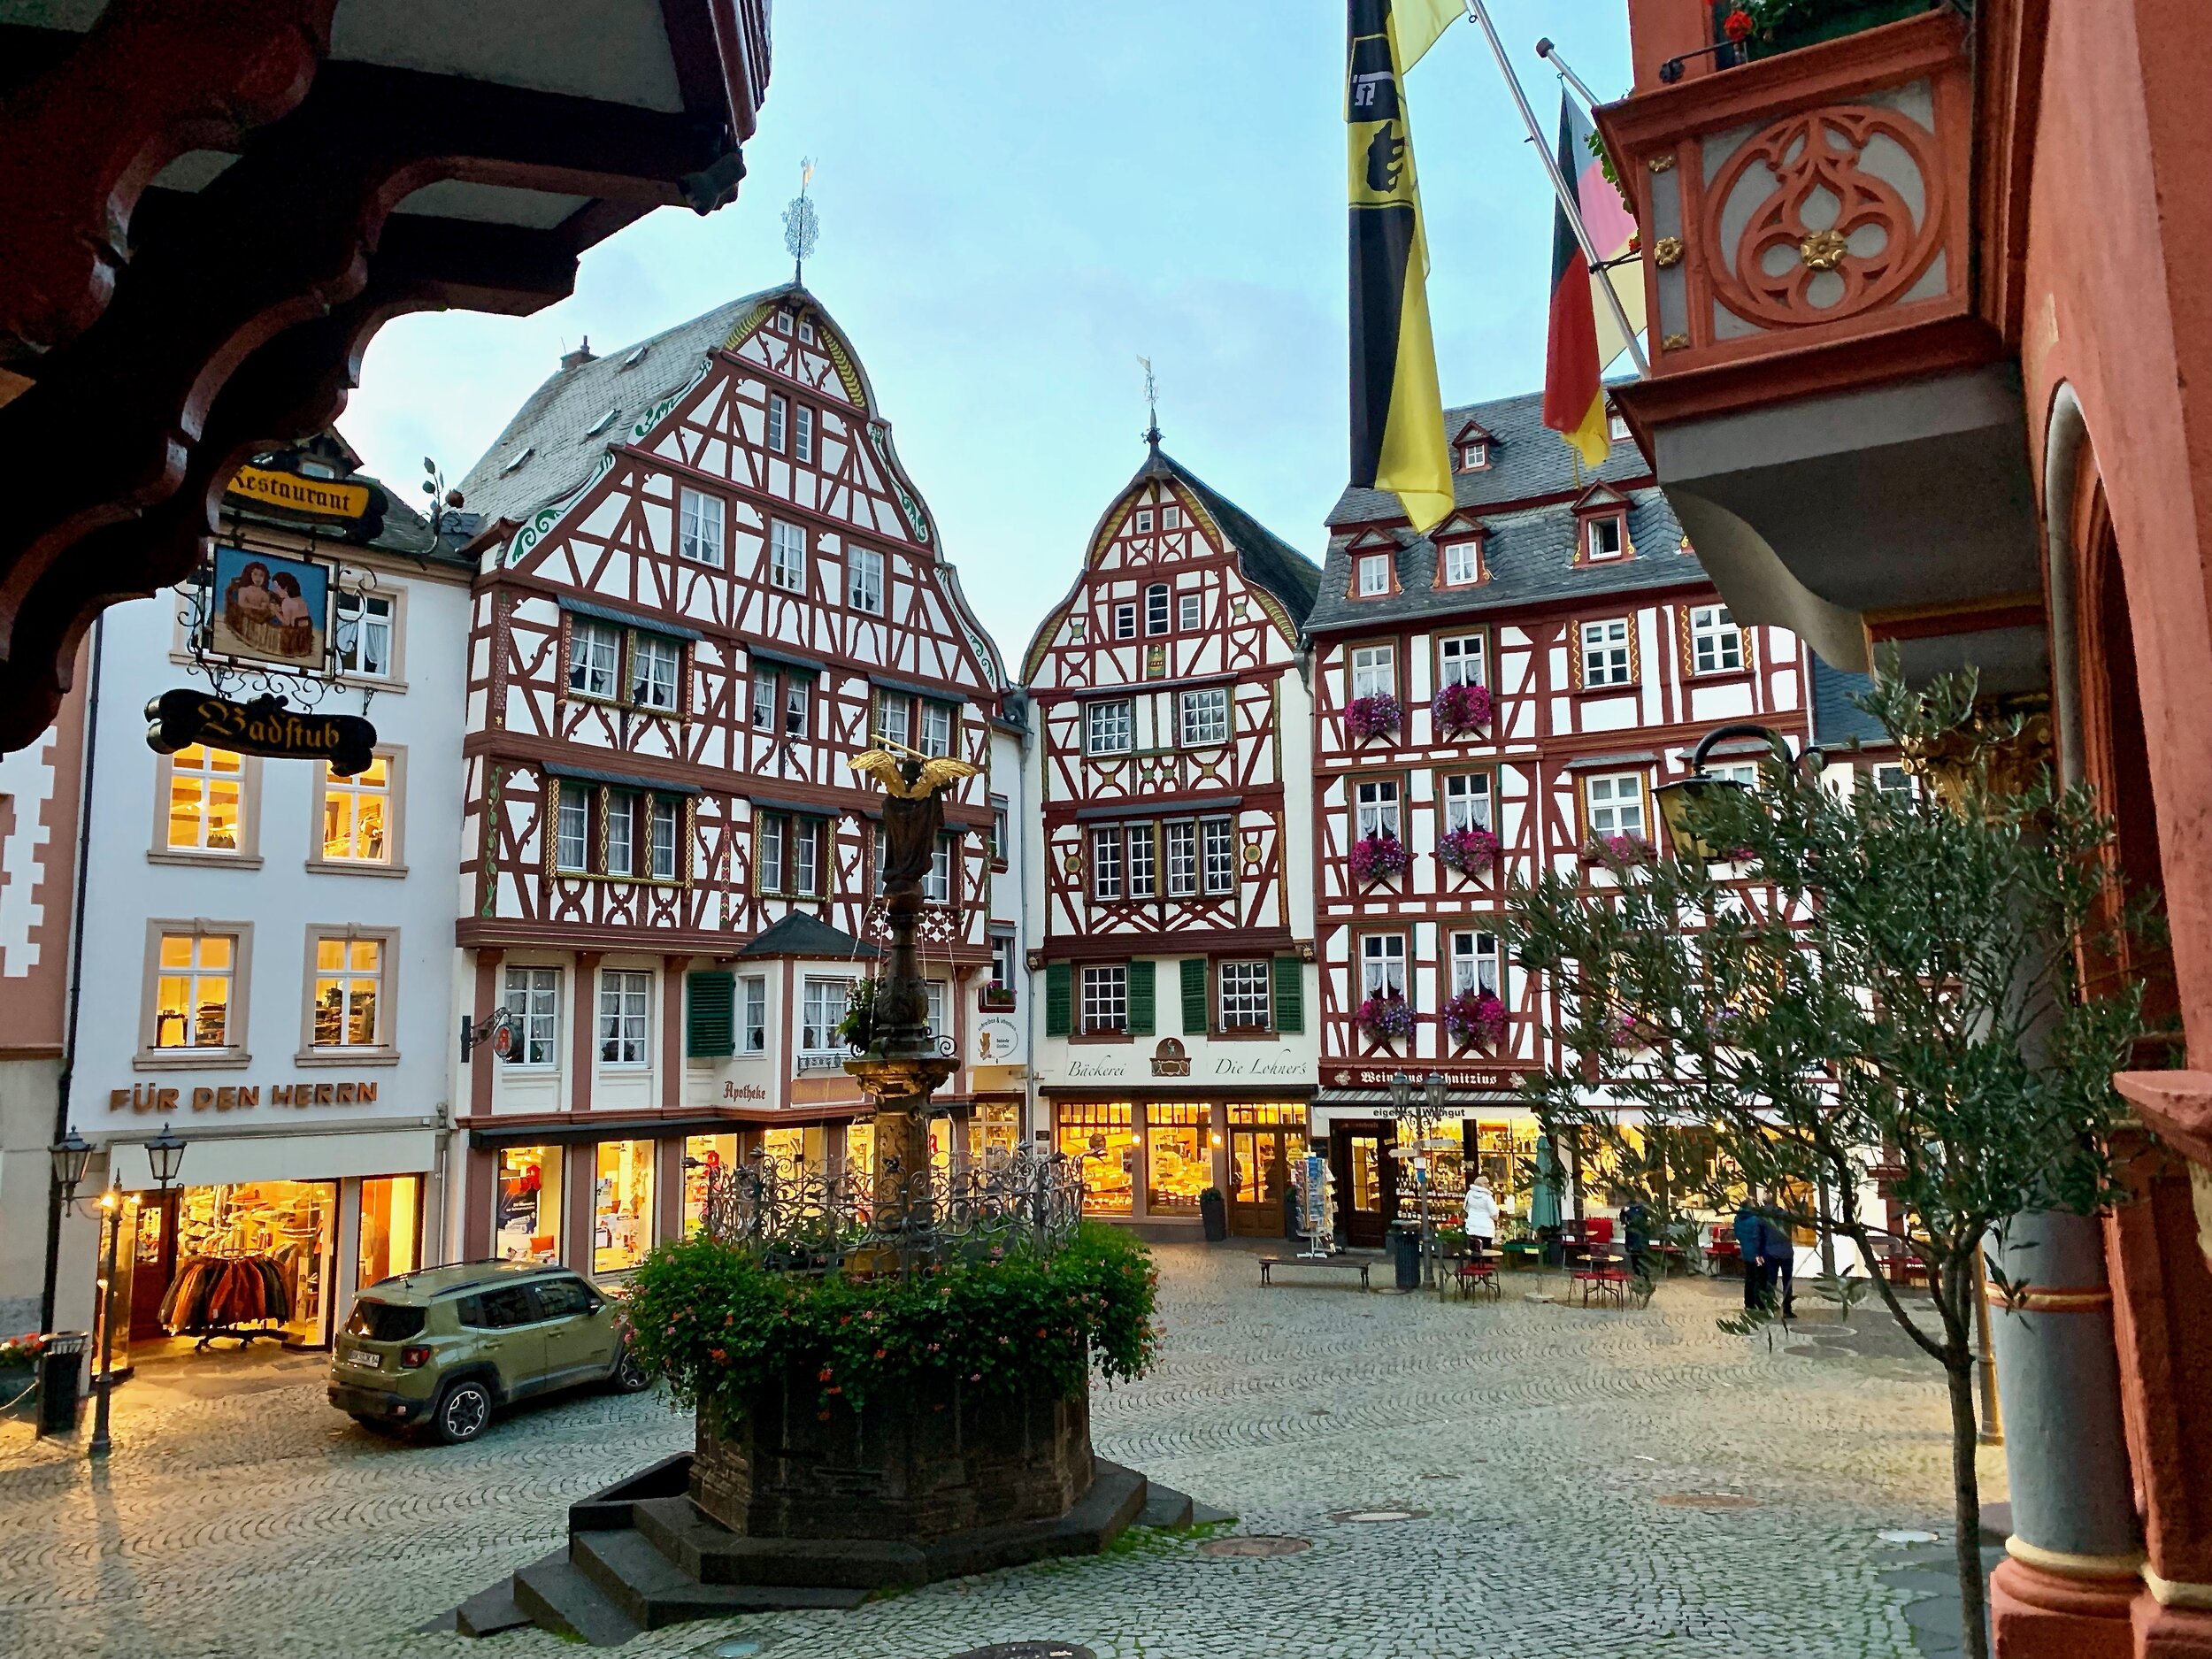 Market square in Bernkastel, Germany on the Mosel River